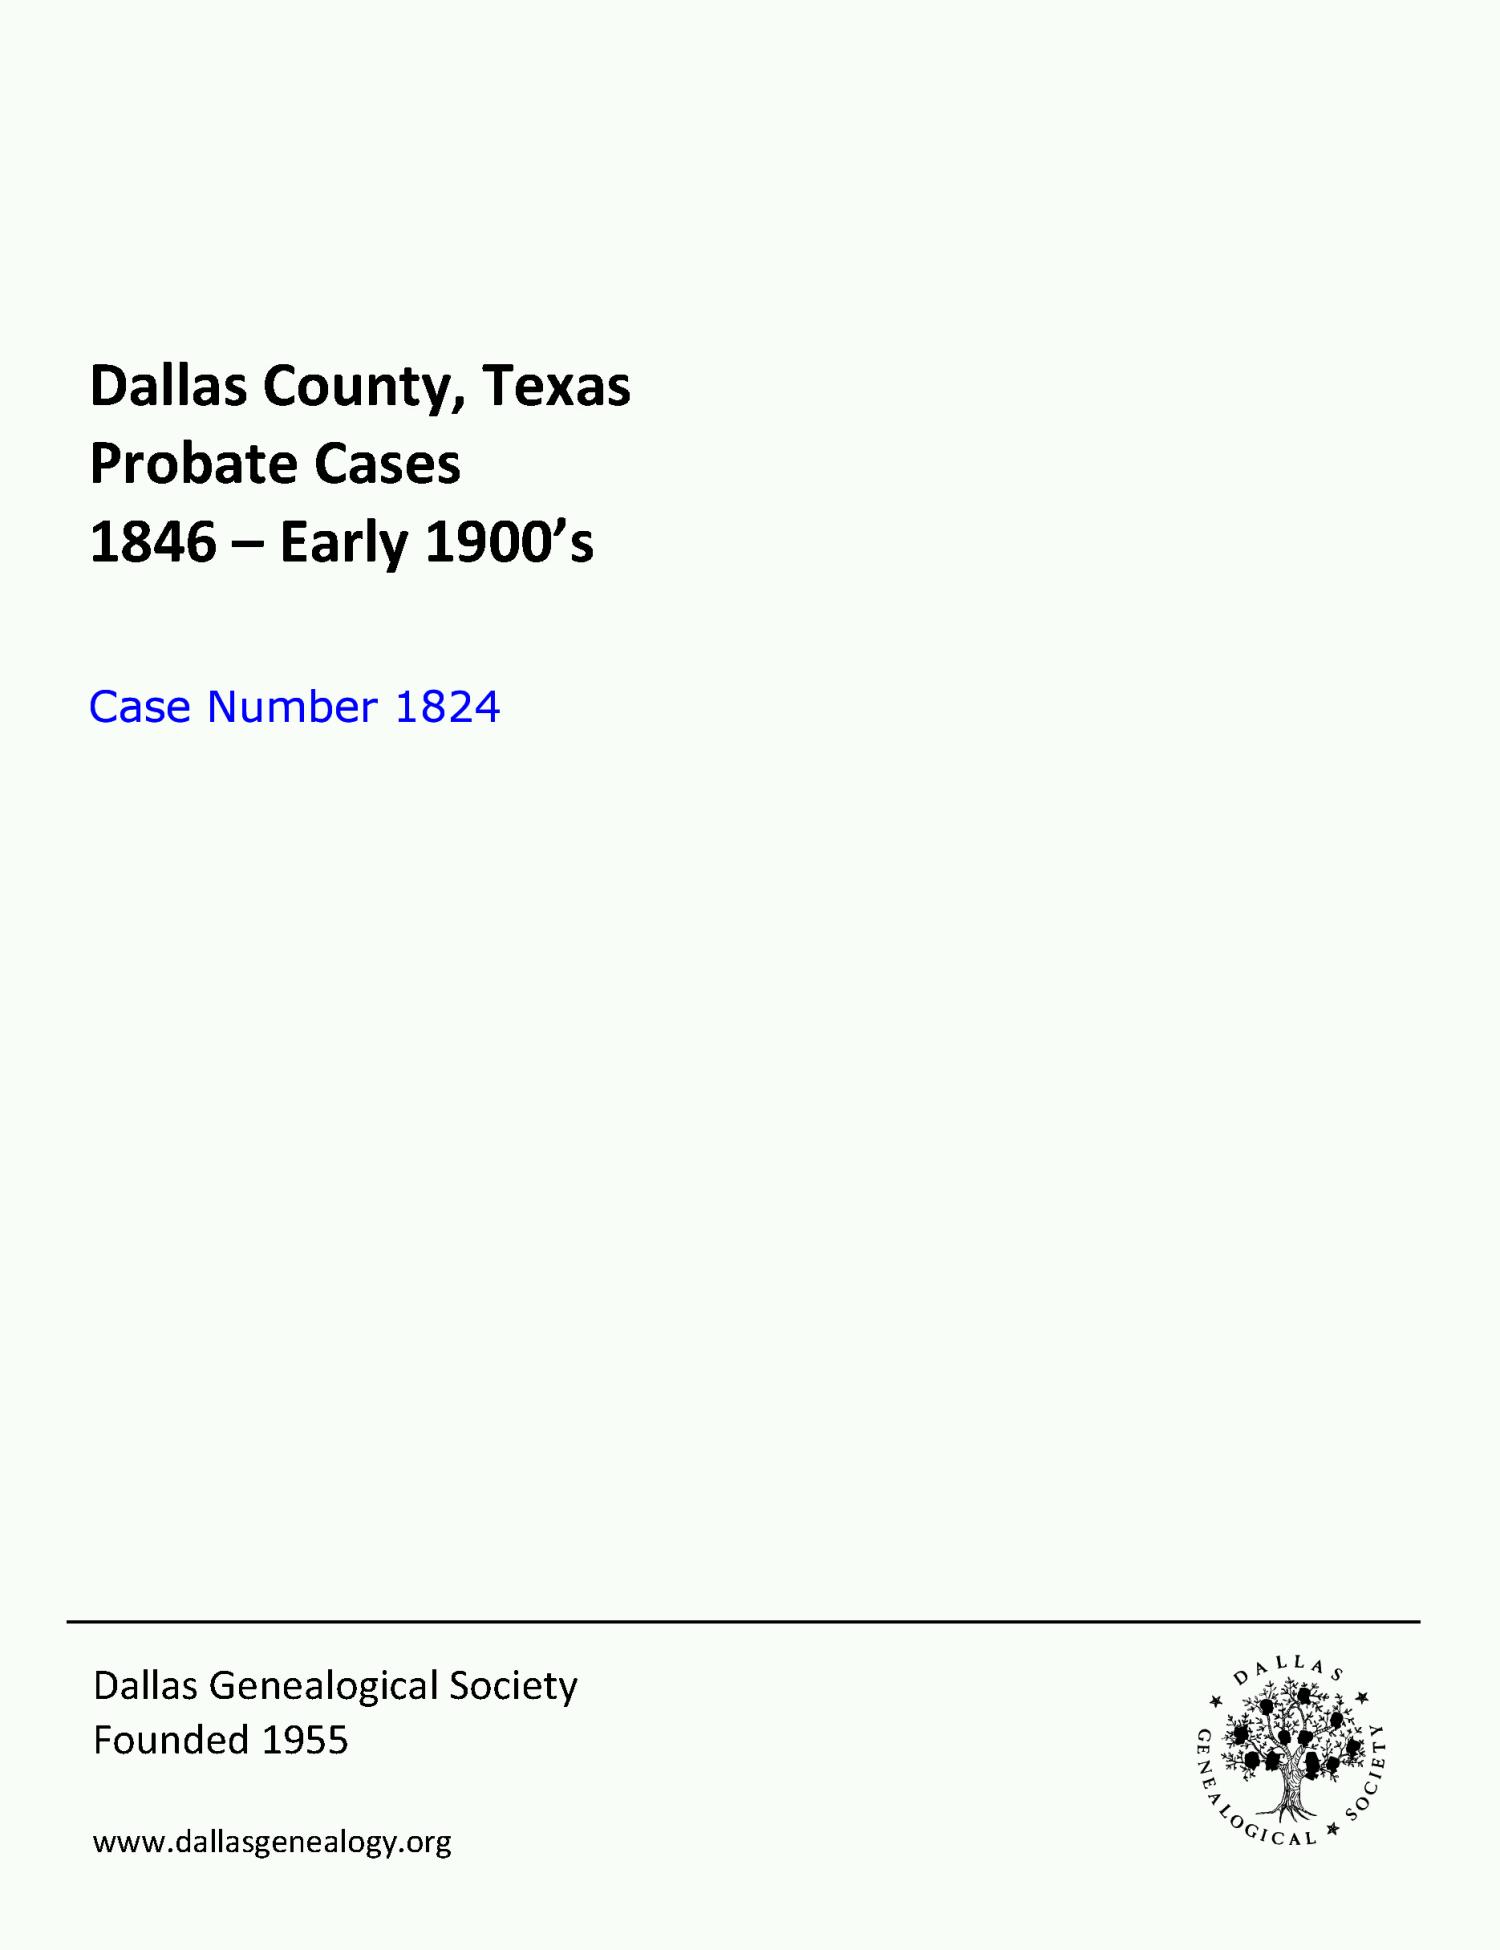 Dallas County Probate Case 1824: Braley, W.H.H. (Deceased)
                                                
                                                    [Sequence #]: 1 of 2
                                                